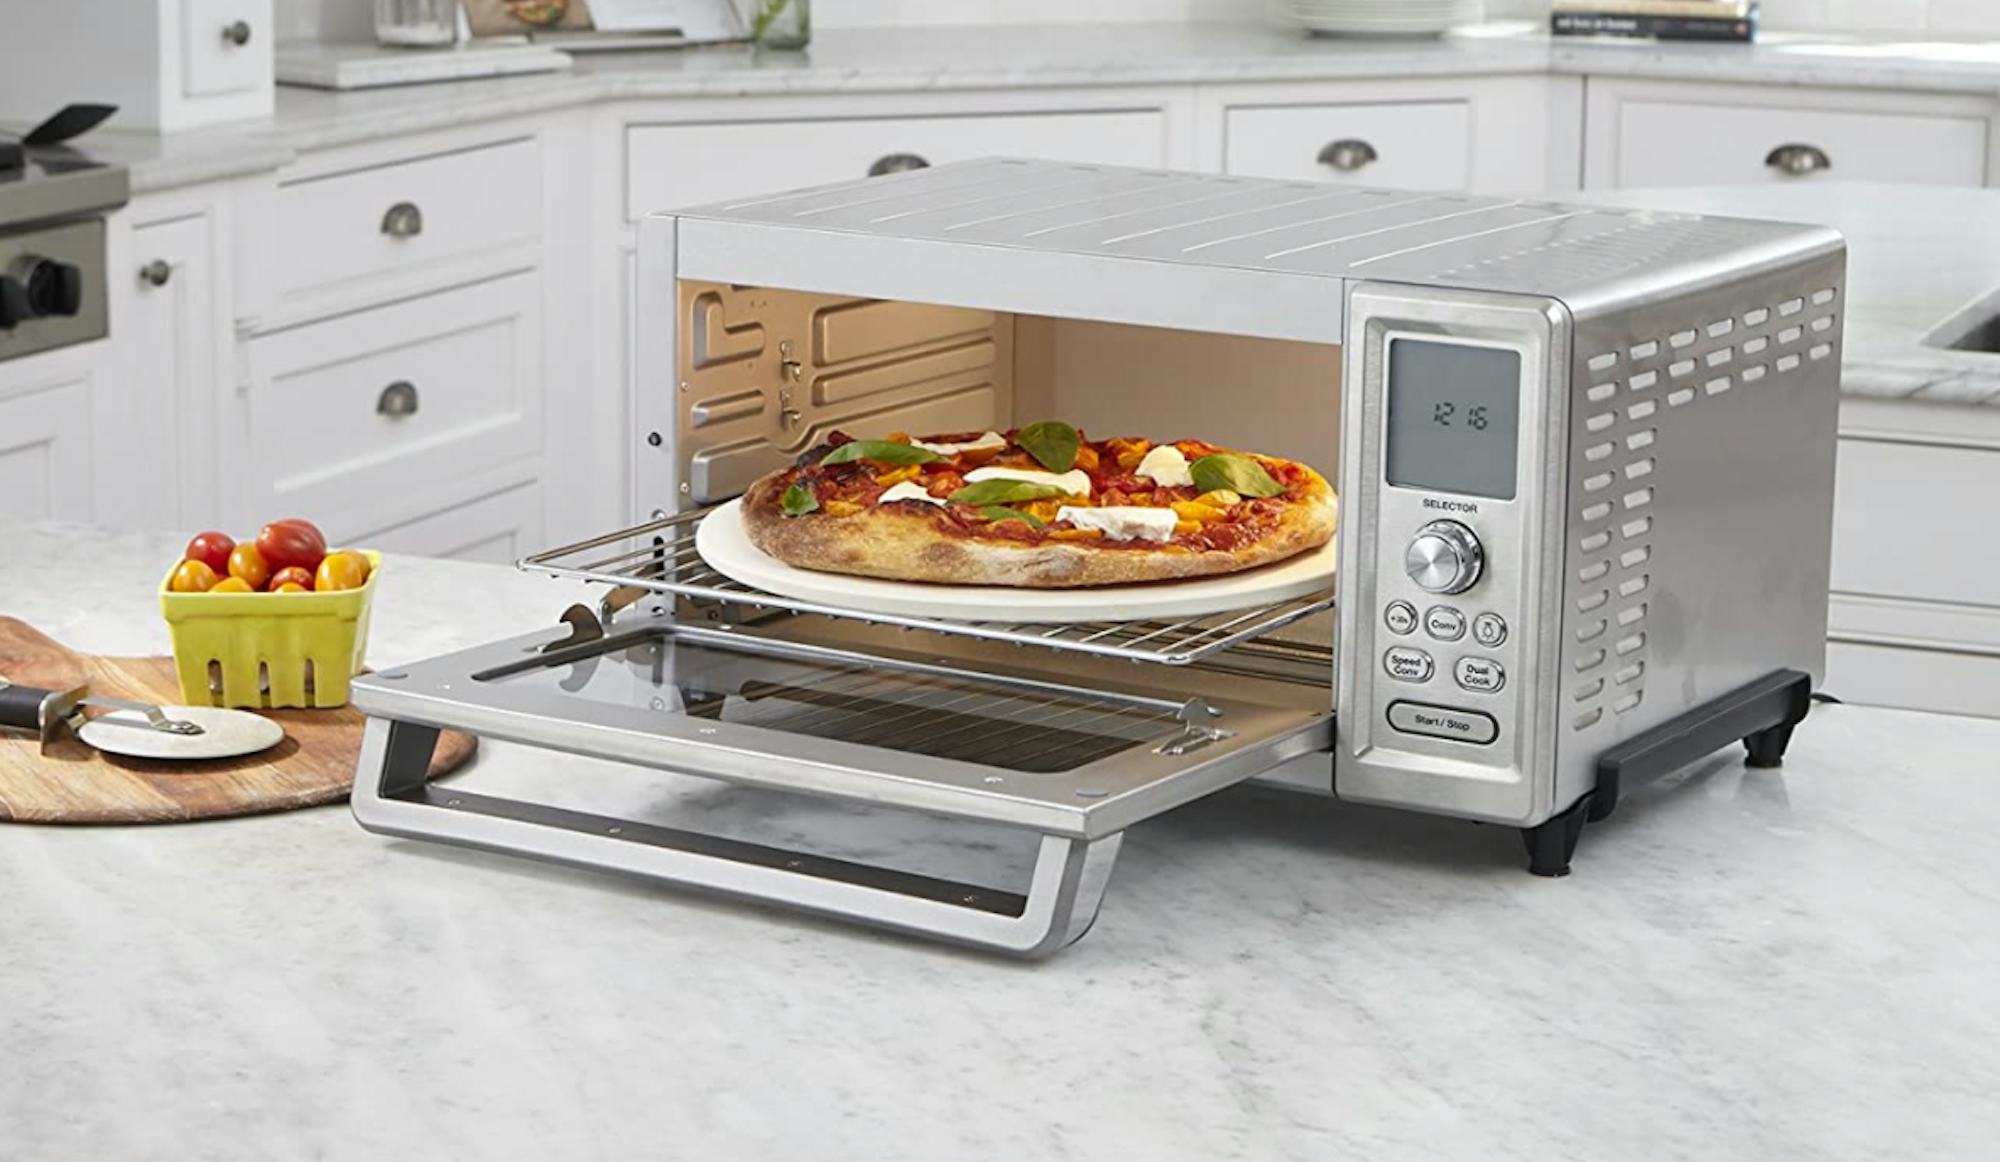 The 3 best cooltouch toaster ovens